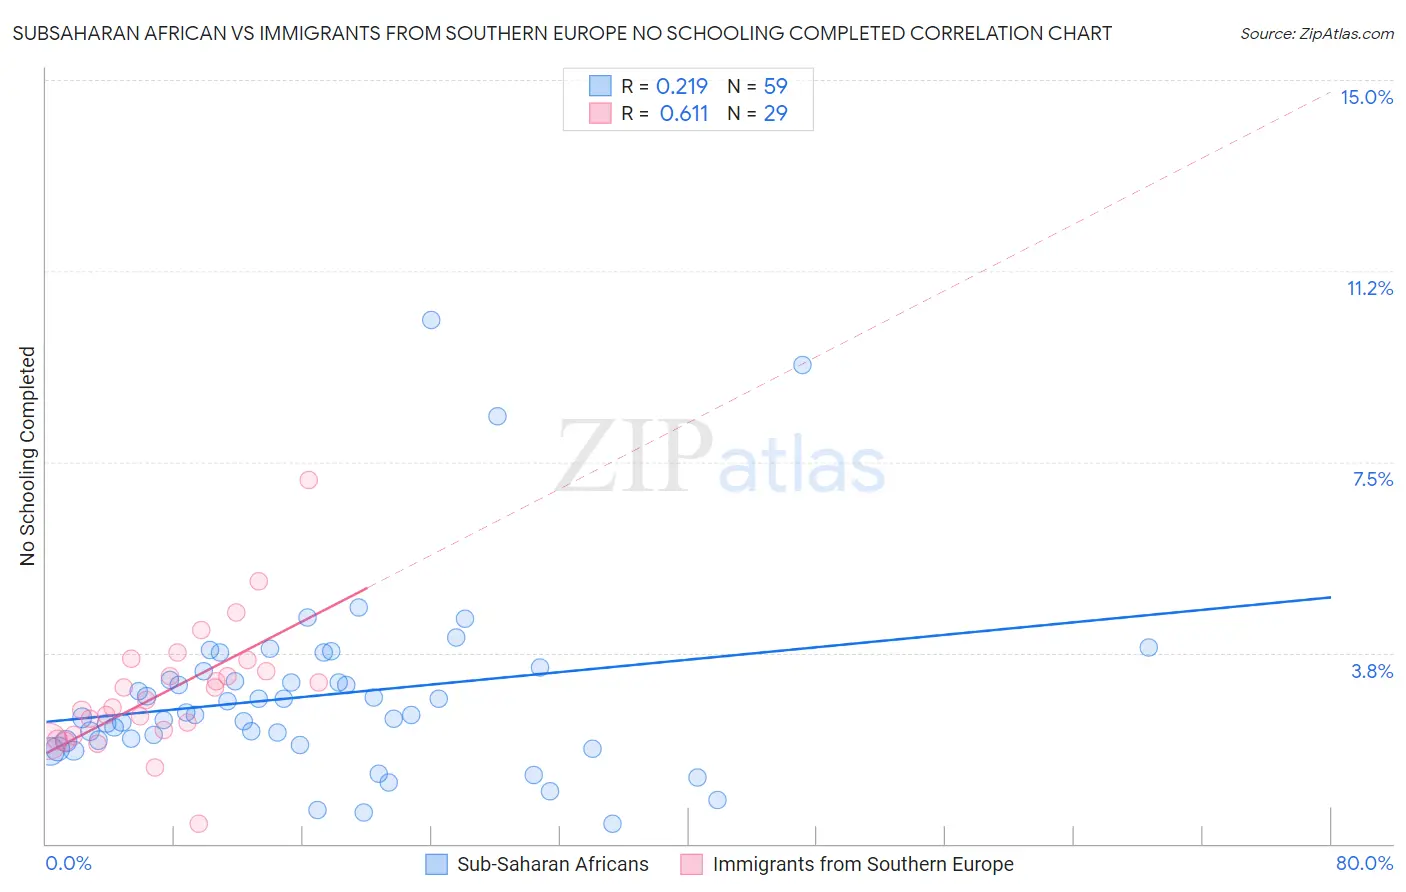 Subsaharan African vs Immigrants from Southern Europe No Schooling Completed